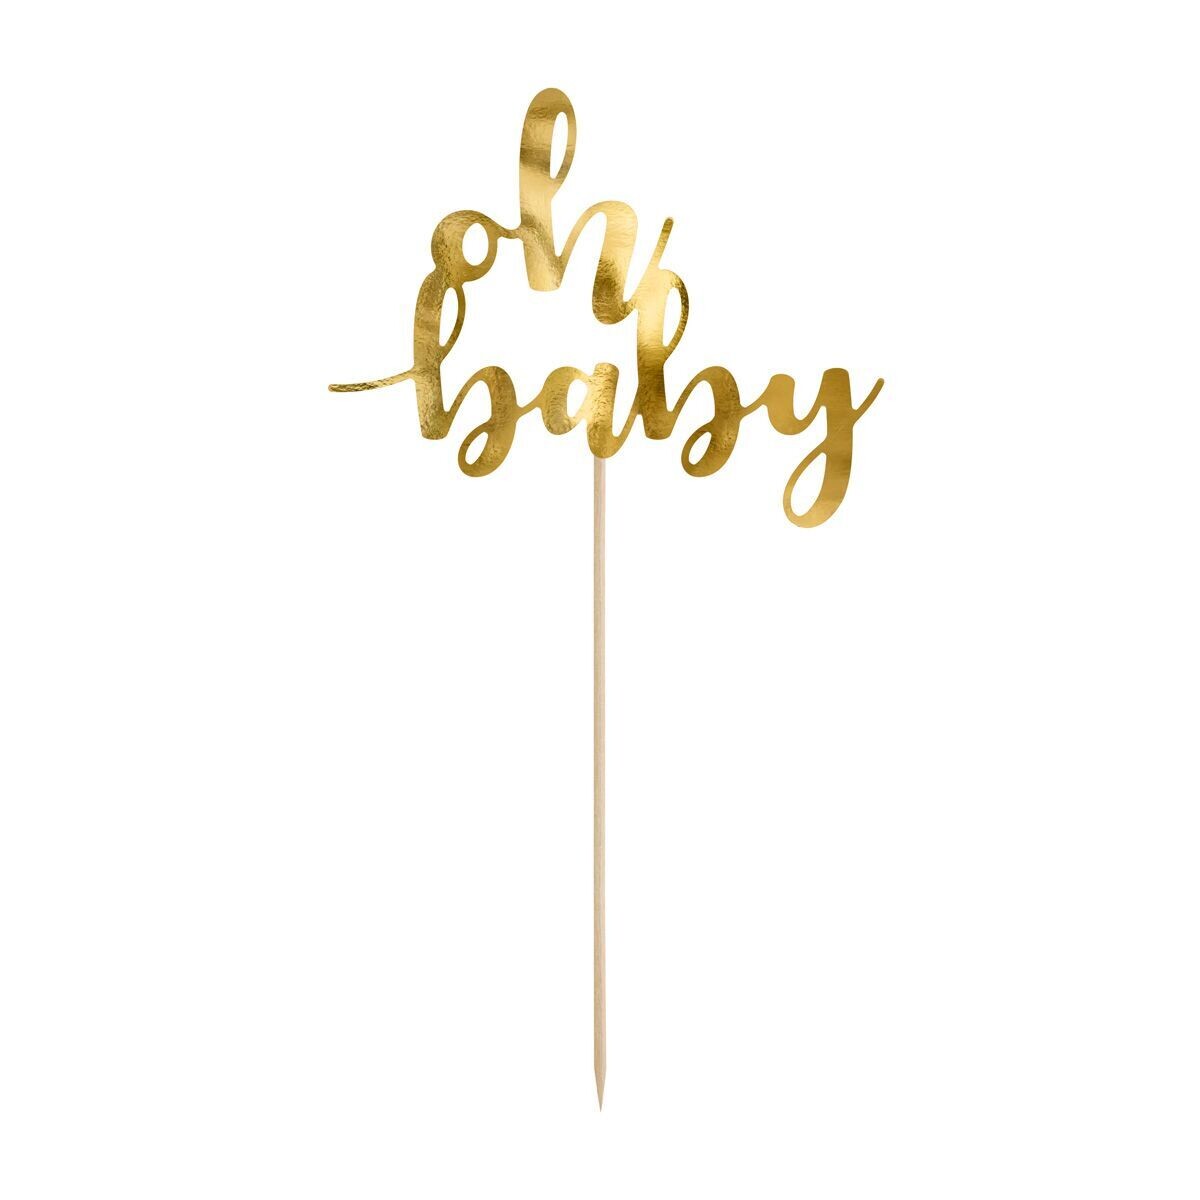 PartyDeco Cake Topper 'Oh Baby' - GOLD - Τόπερ Τούρτας Χρυσό 'Oh Baby'